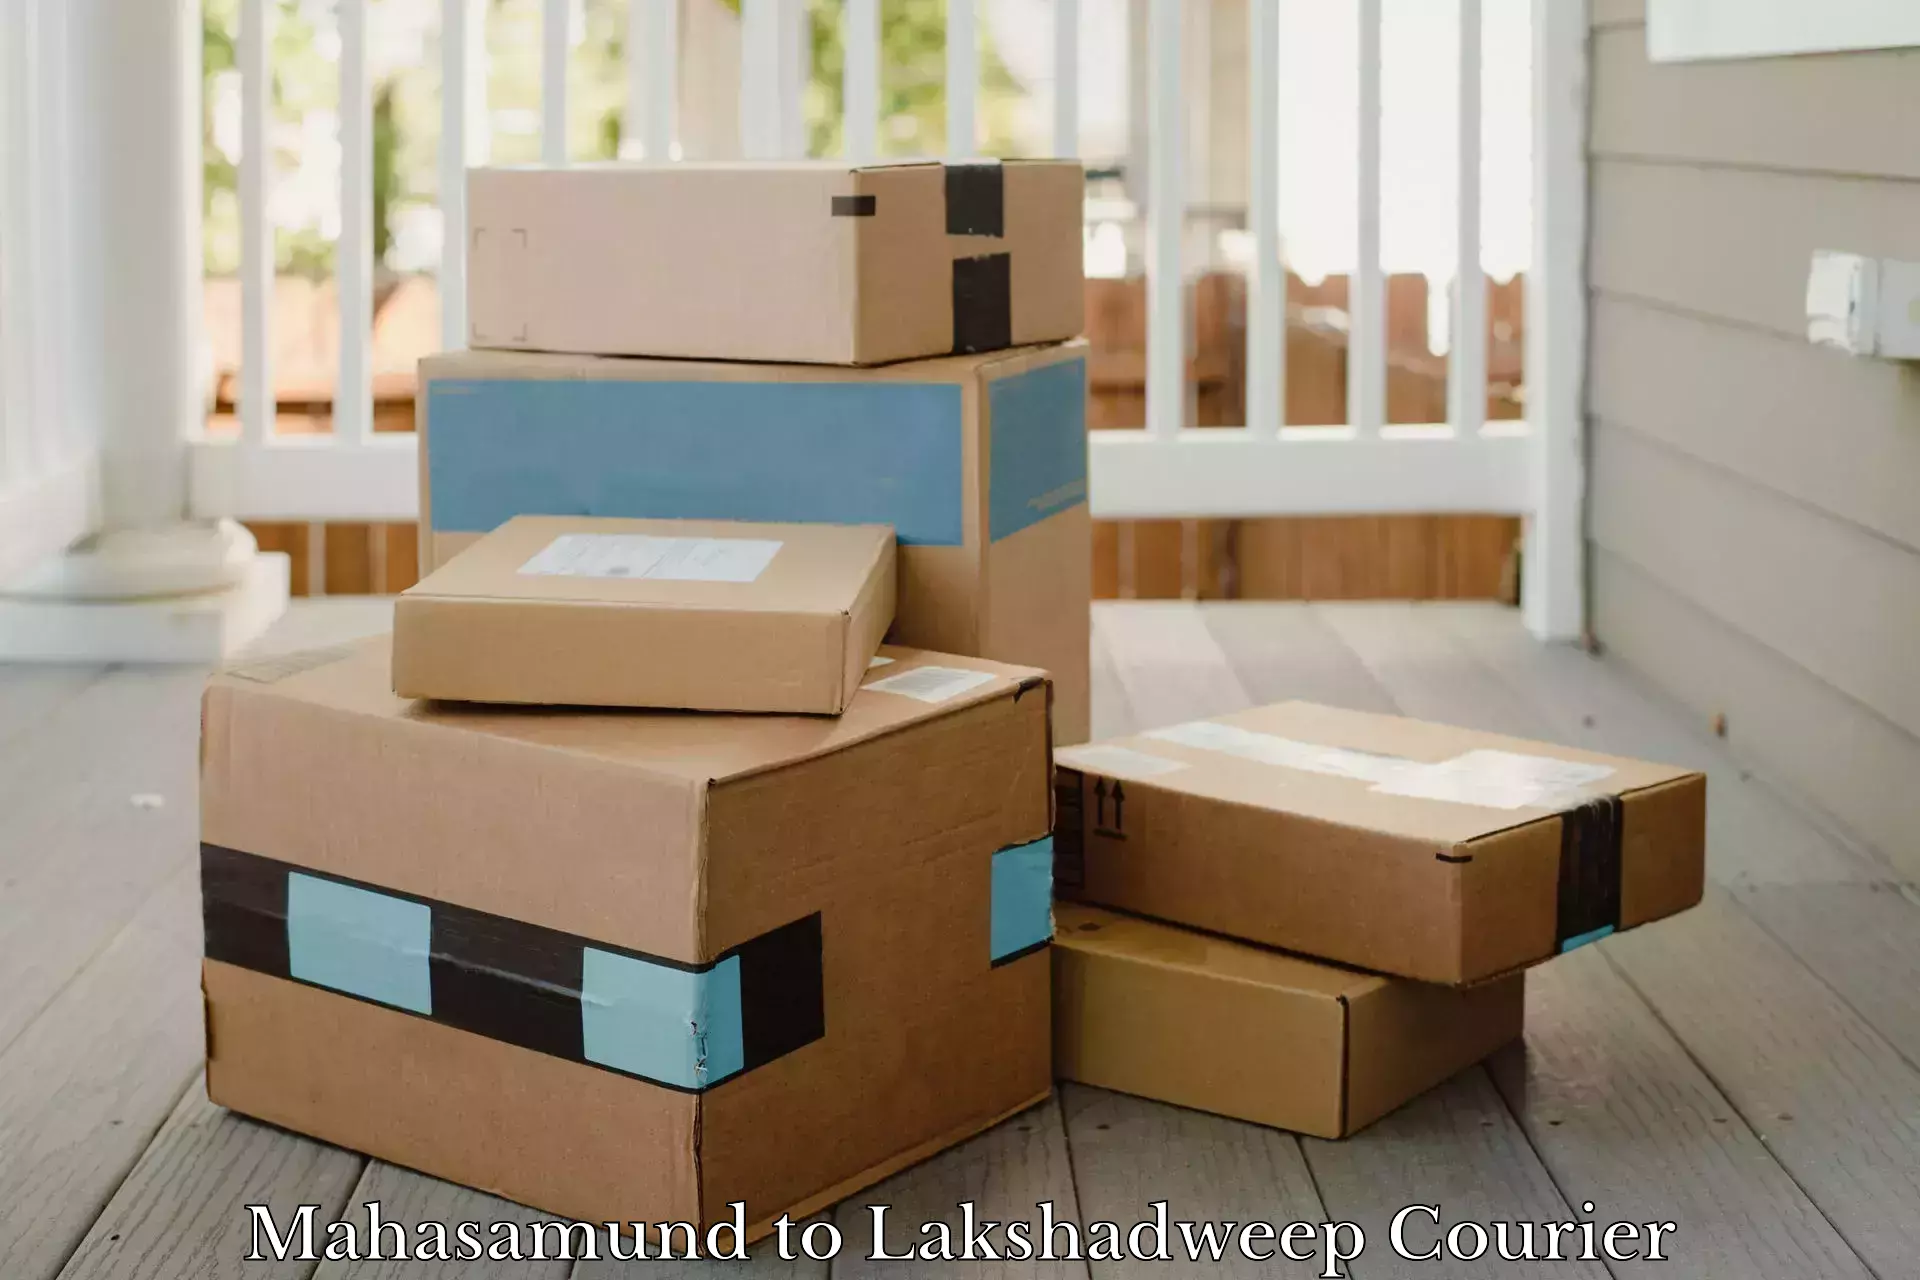 Cost-effective courier options Mahasamund to Lakshadweep